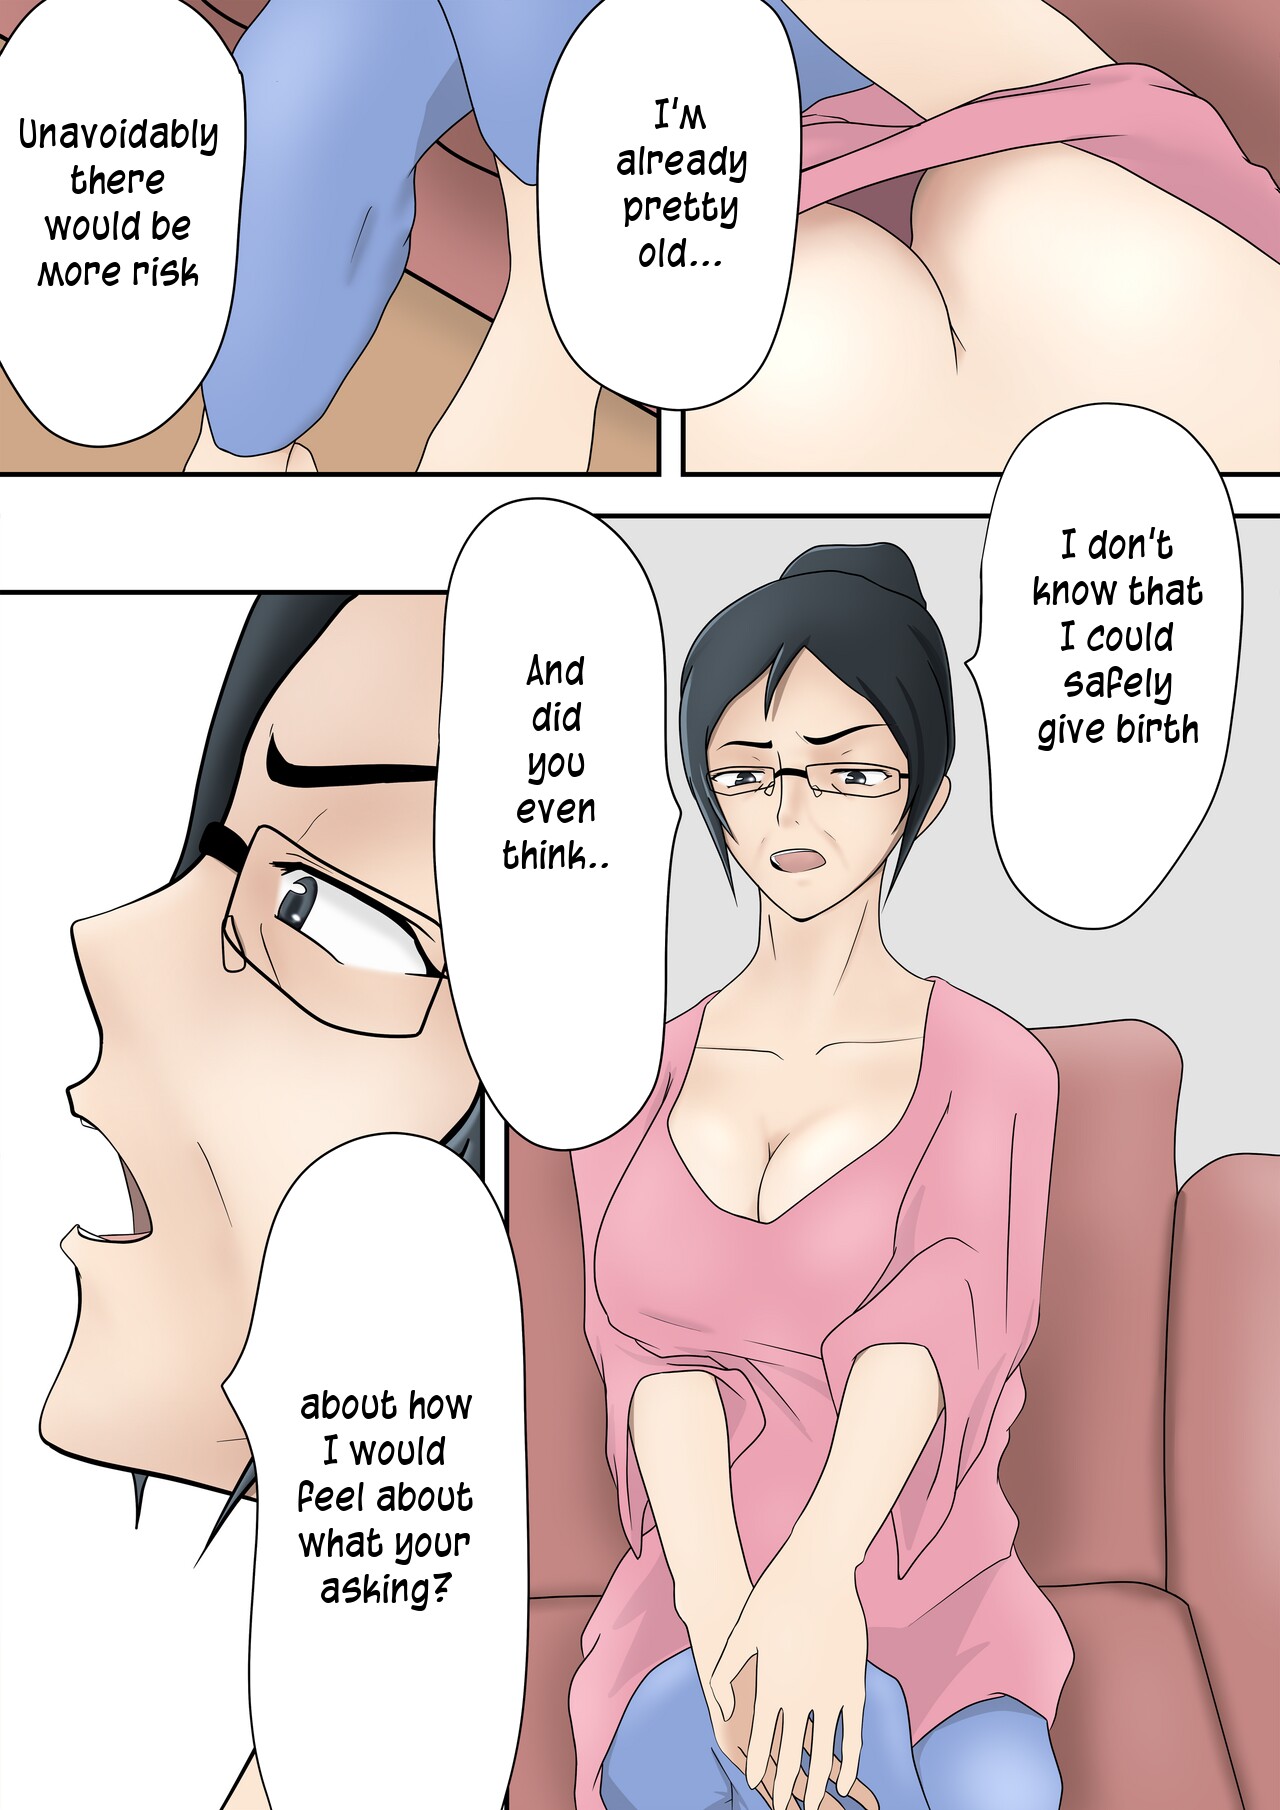 The story of how I asked my mother to be our surrogate birthgiver - taboo comics pic